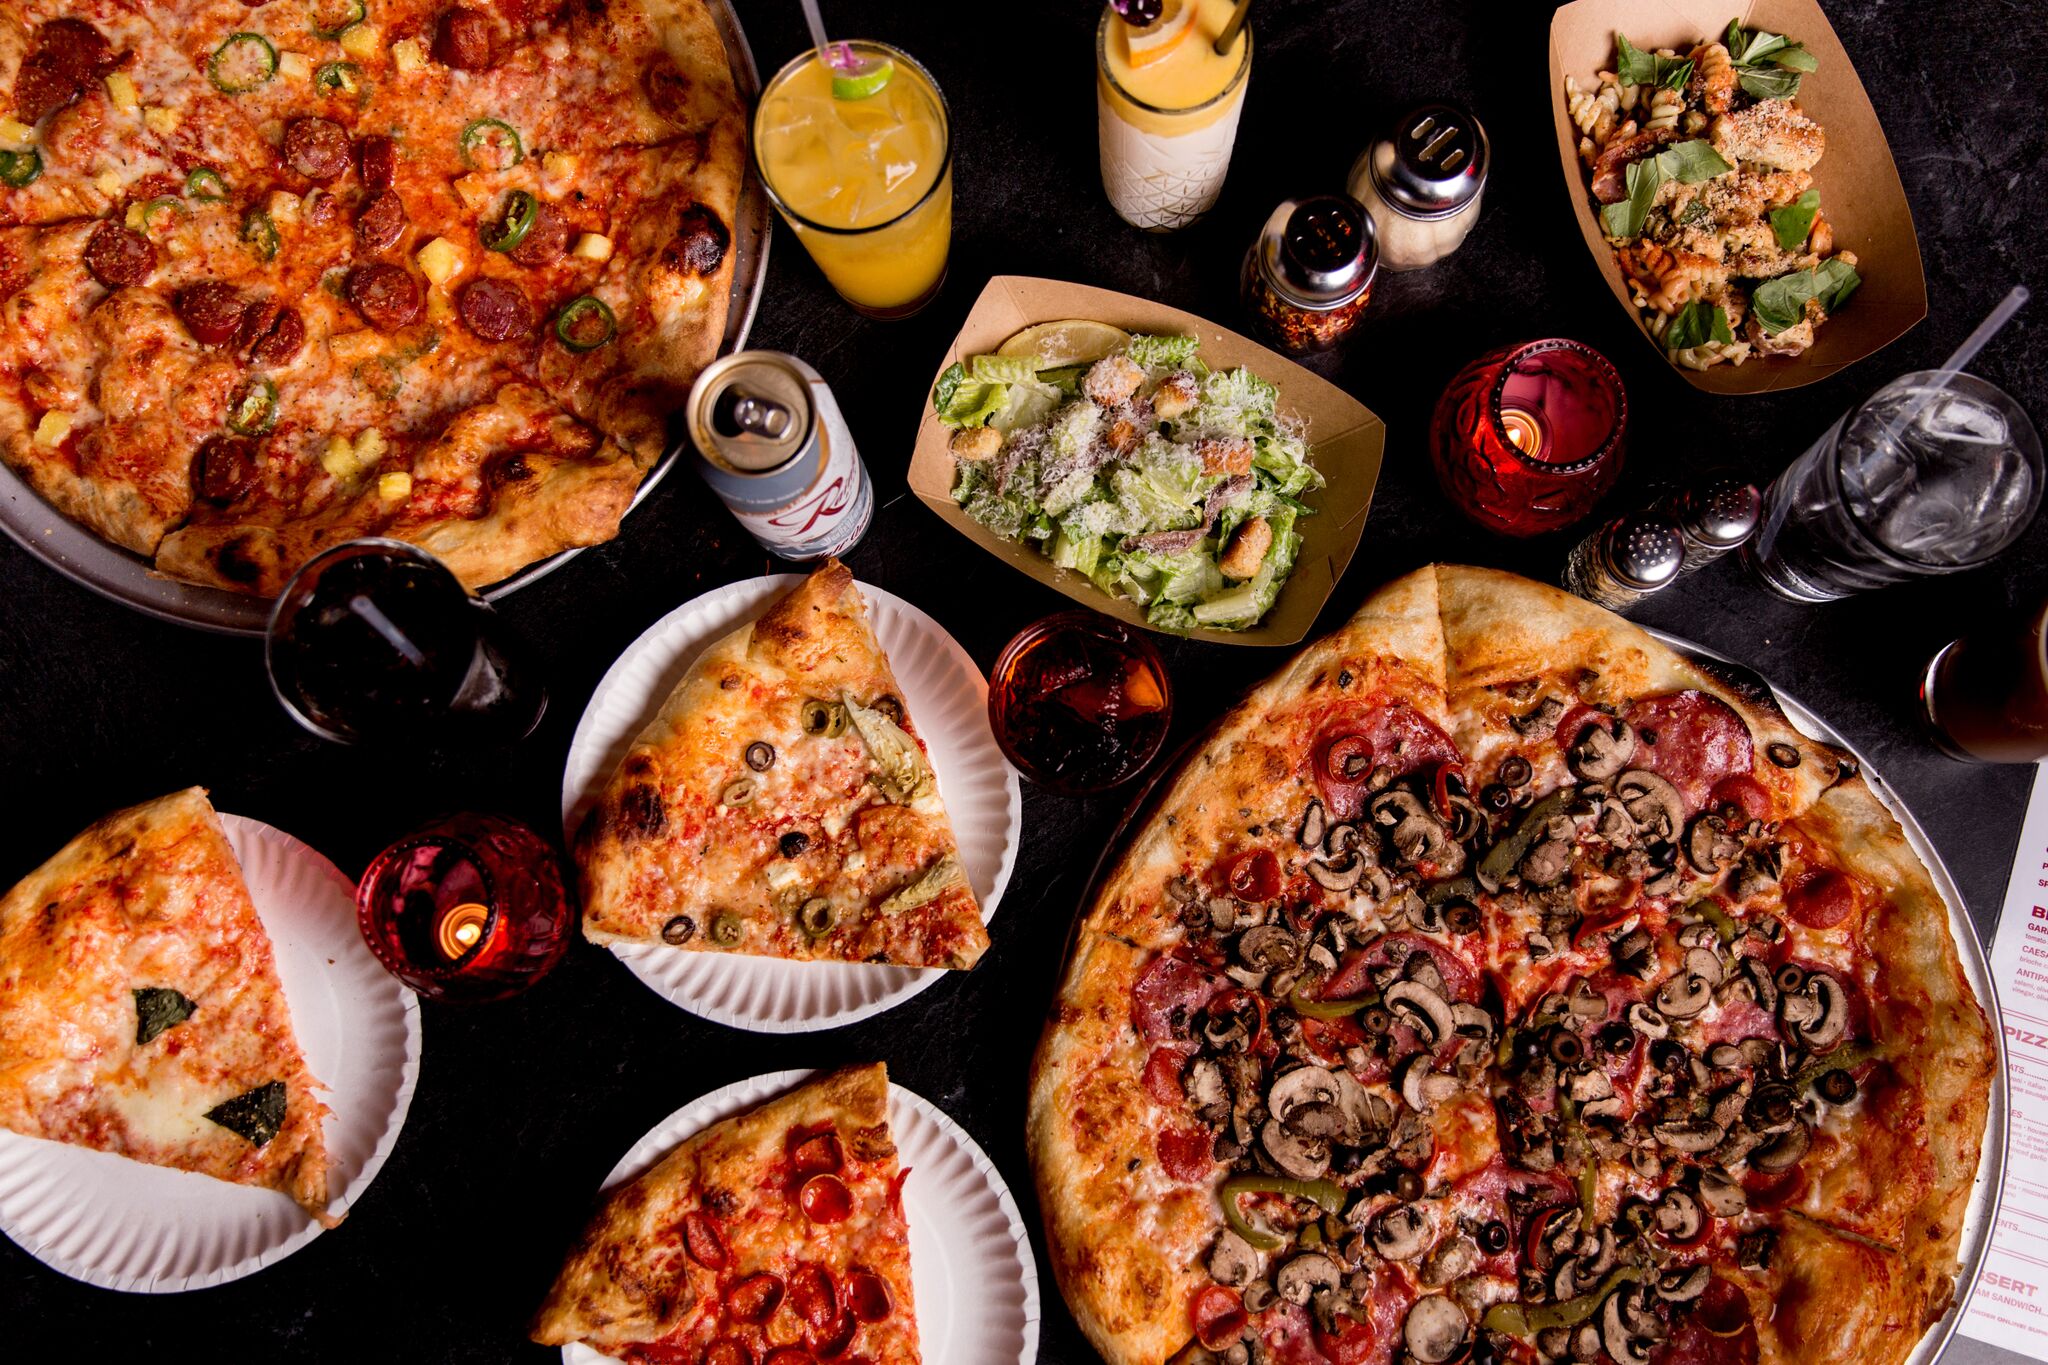 A top-down view of several different pizzas, with a variety of toppings, alongside cocktails, beers, and salads.